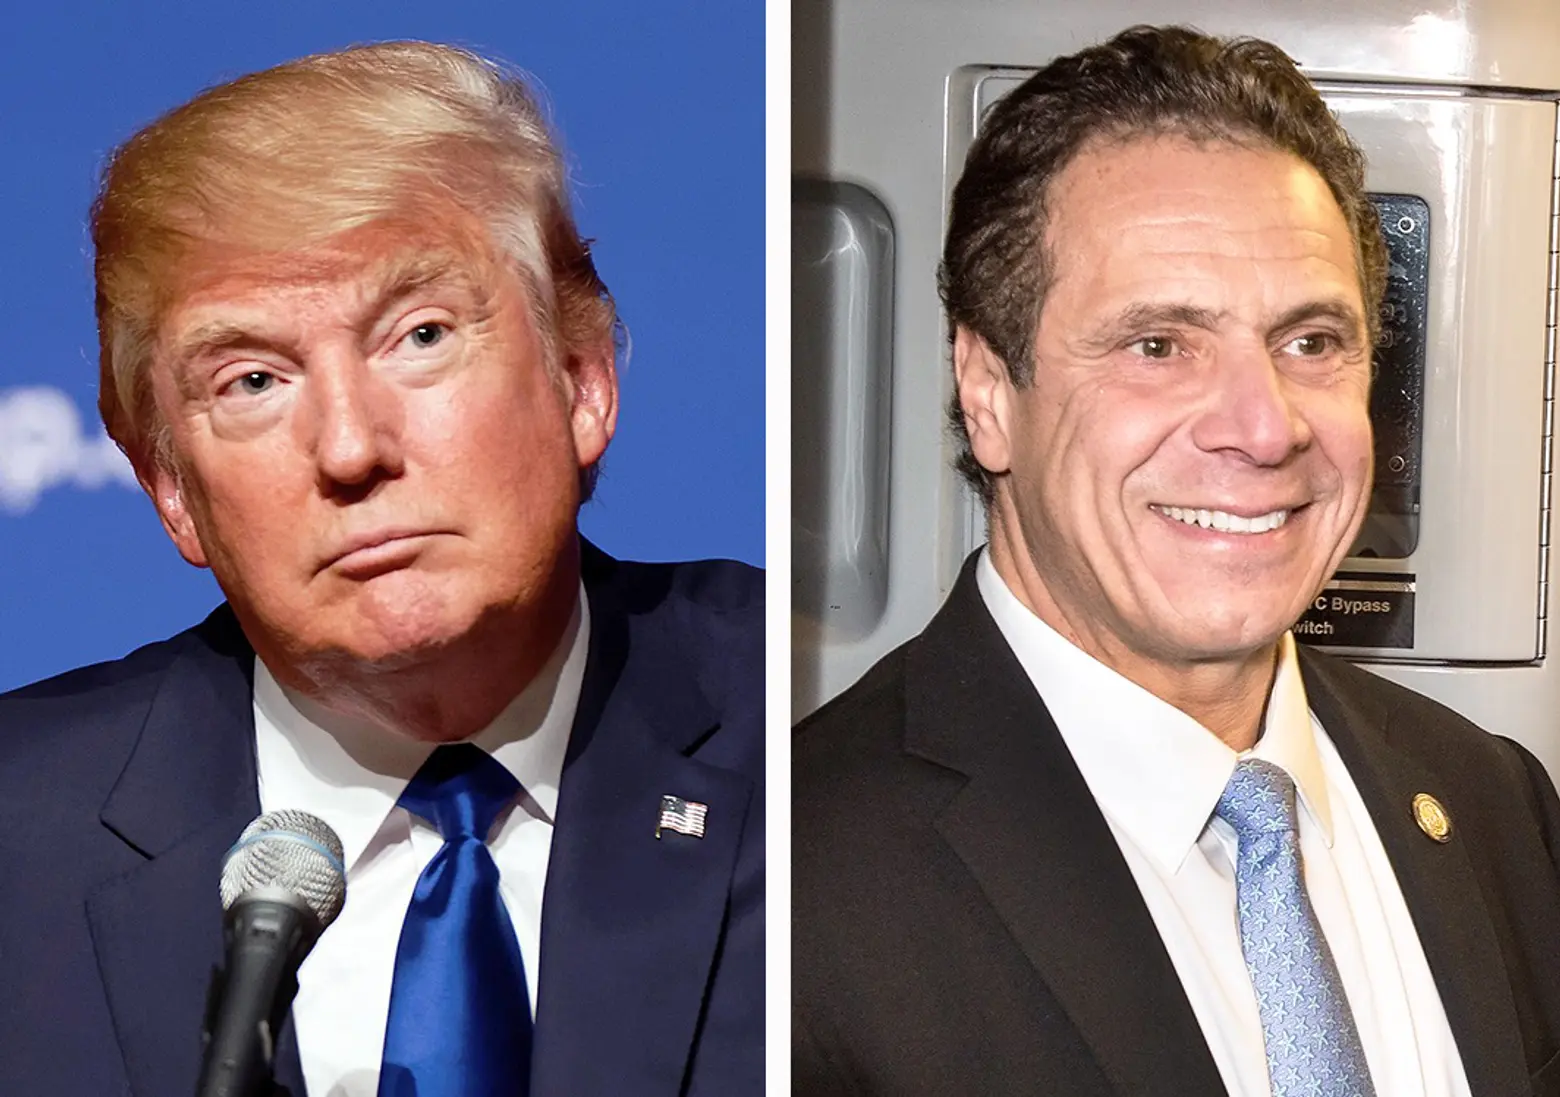 After threat to defund NYC, Cuomo says Trump will need ‘an army’ to walk down the street